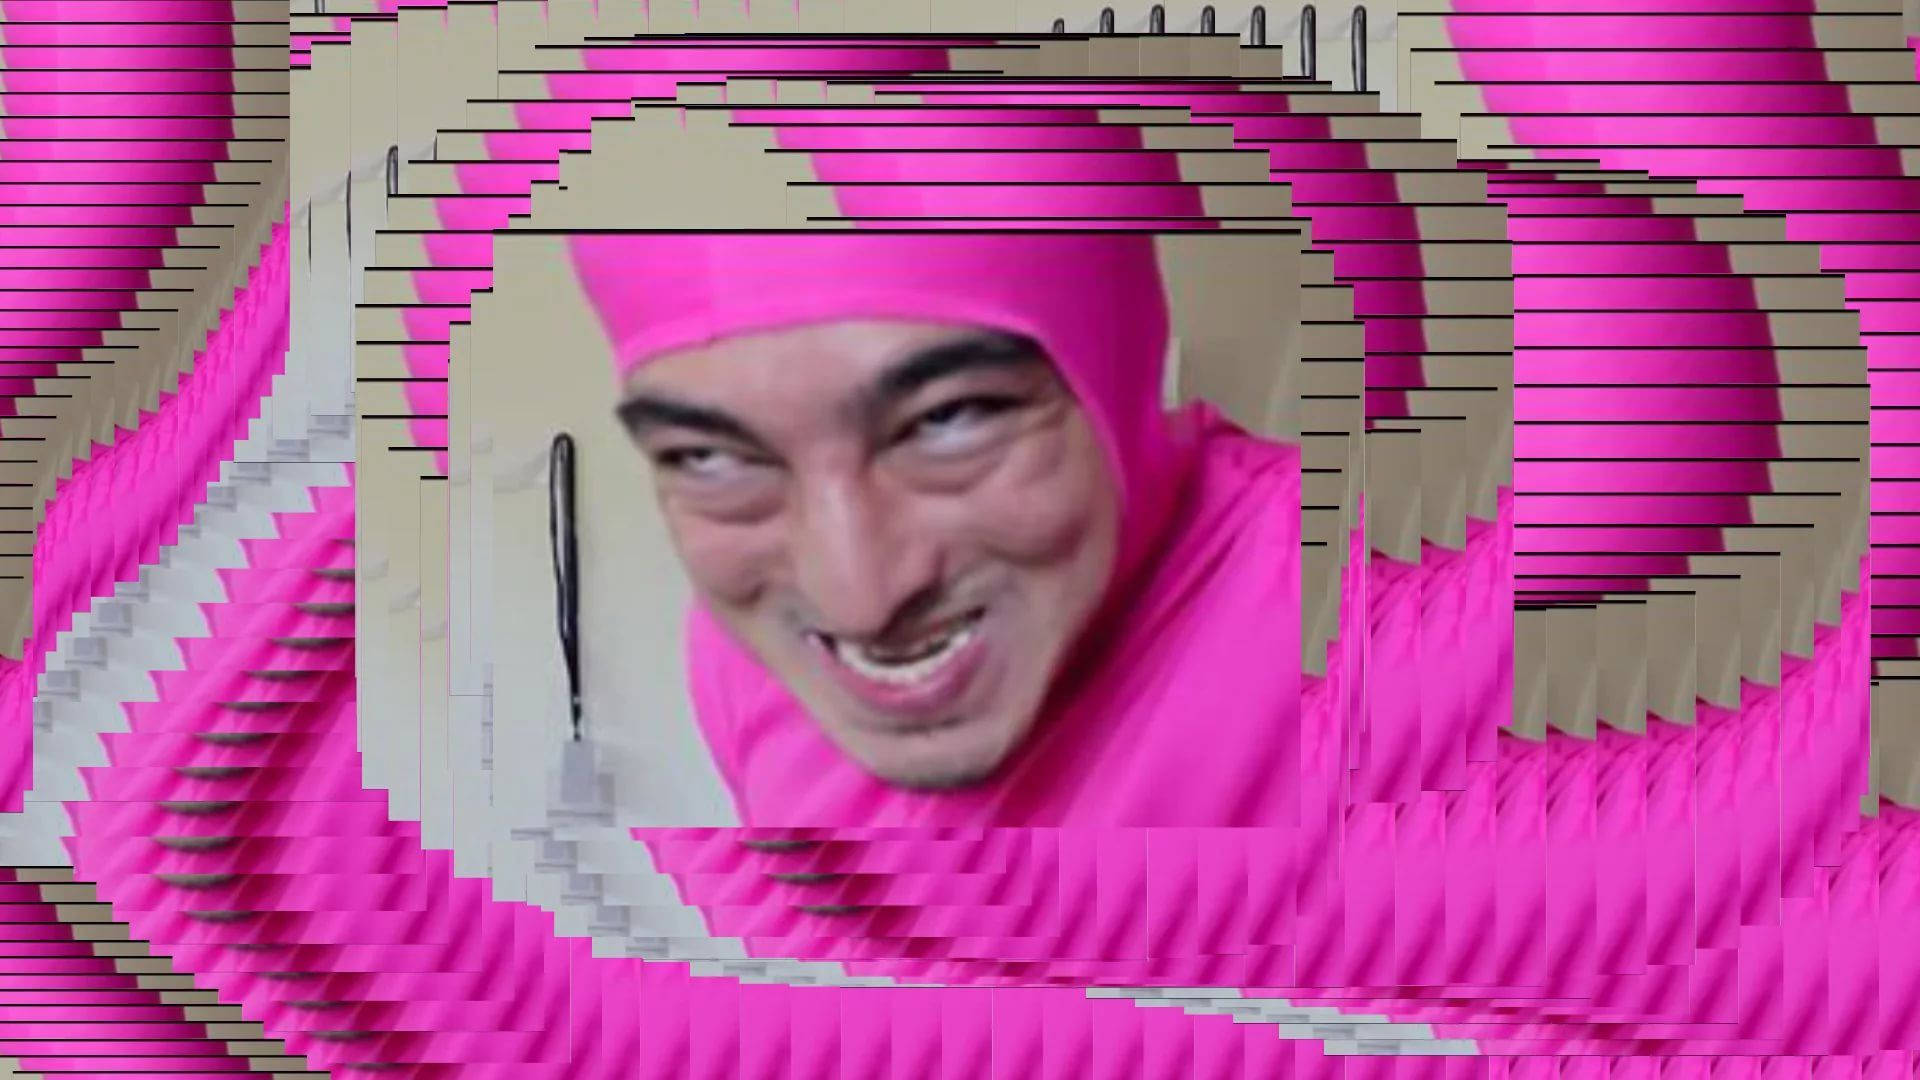 [100 ] Filthy Frank Wallpapers